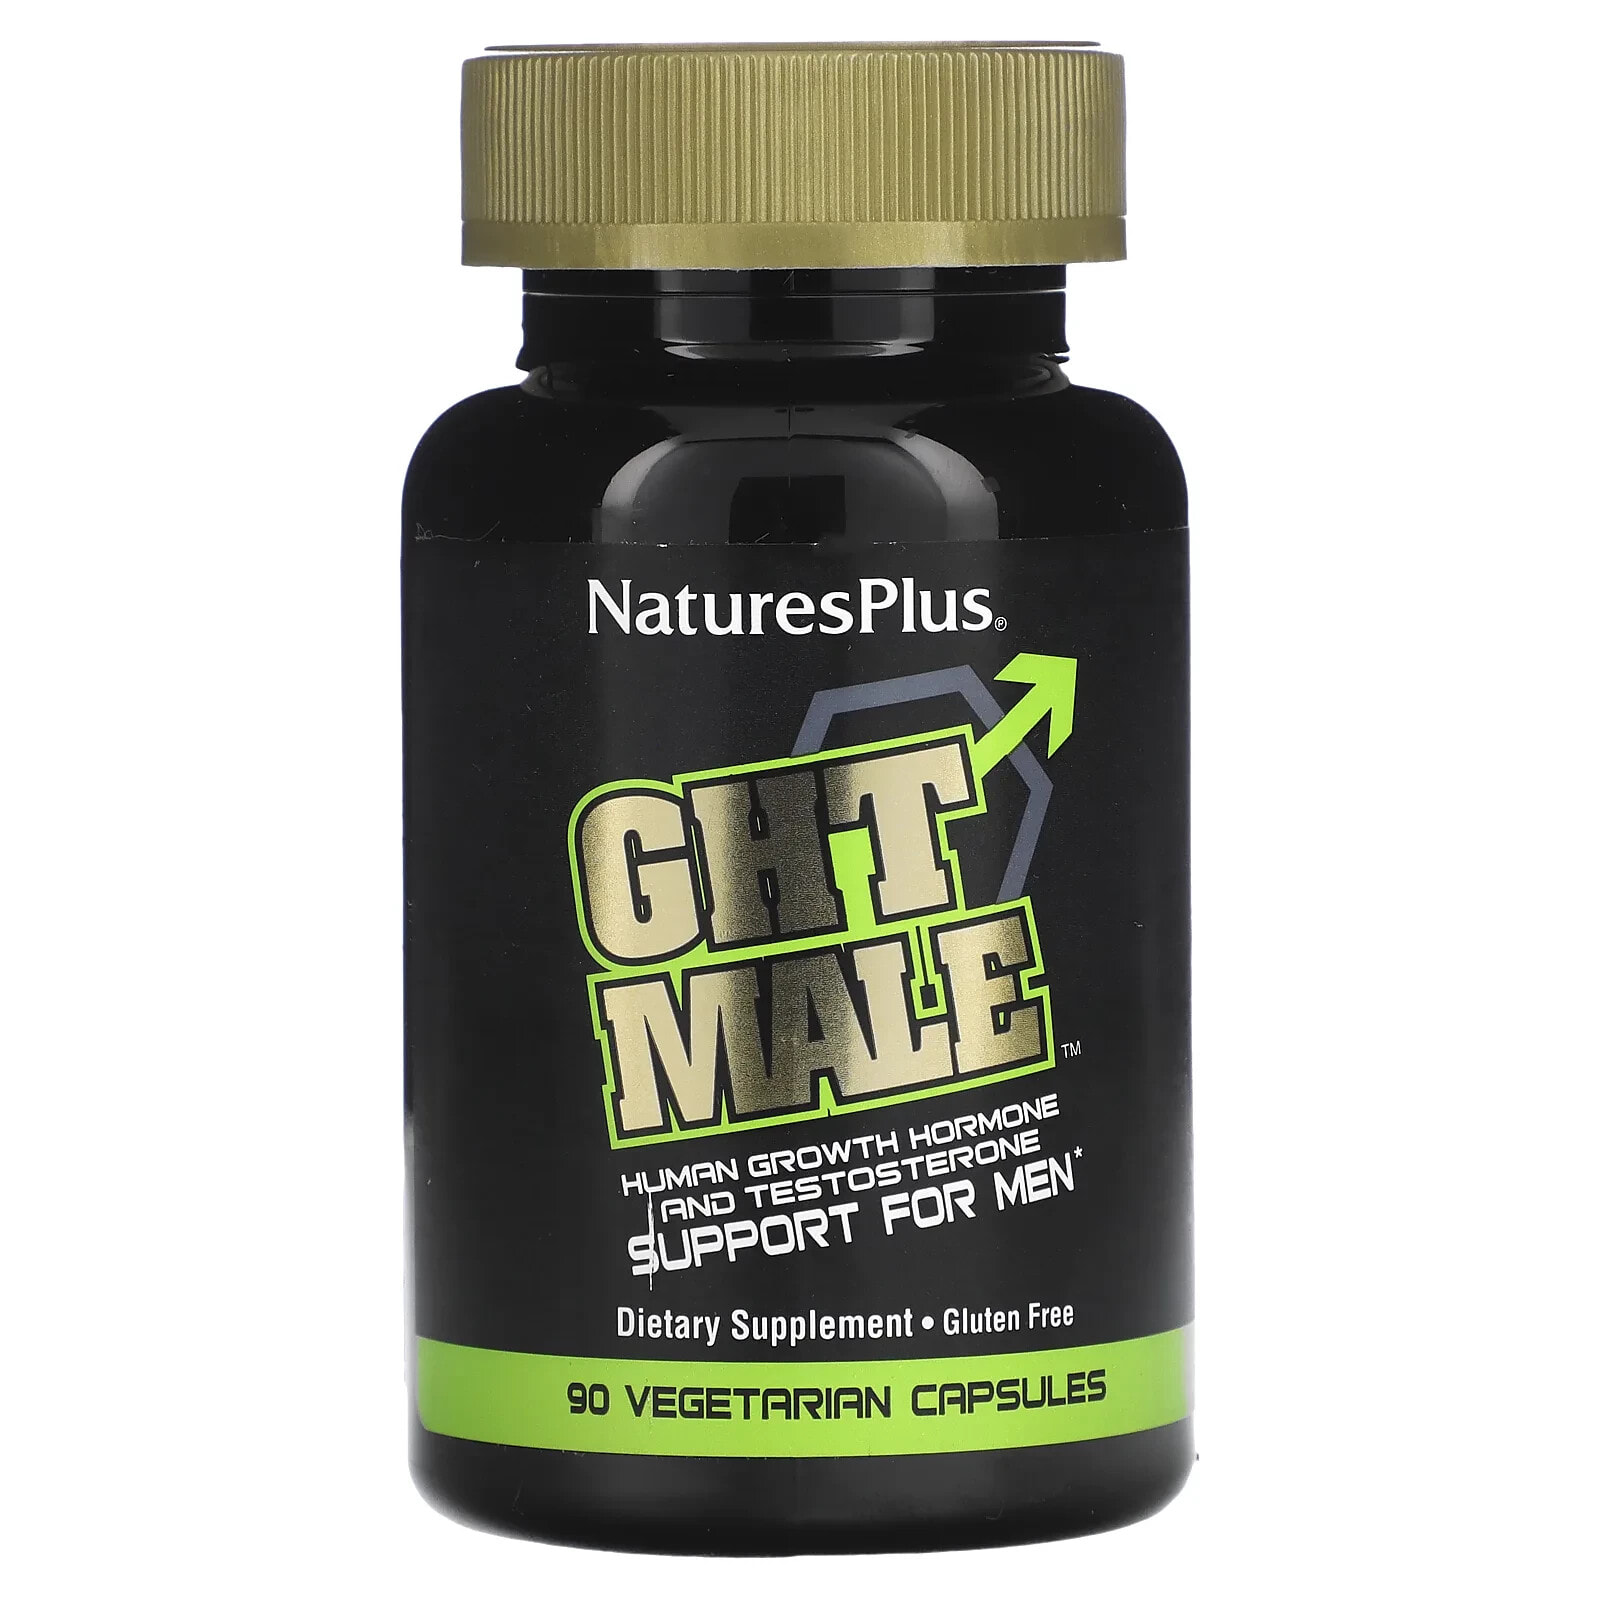 GHT Male, Human Growth Hormone And Testosterone Support For Men, 90 Vegetarian Capsules